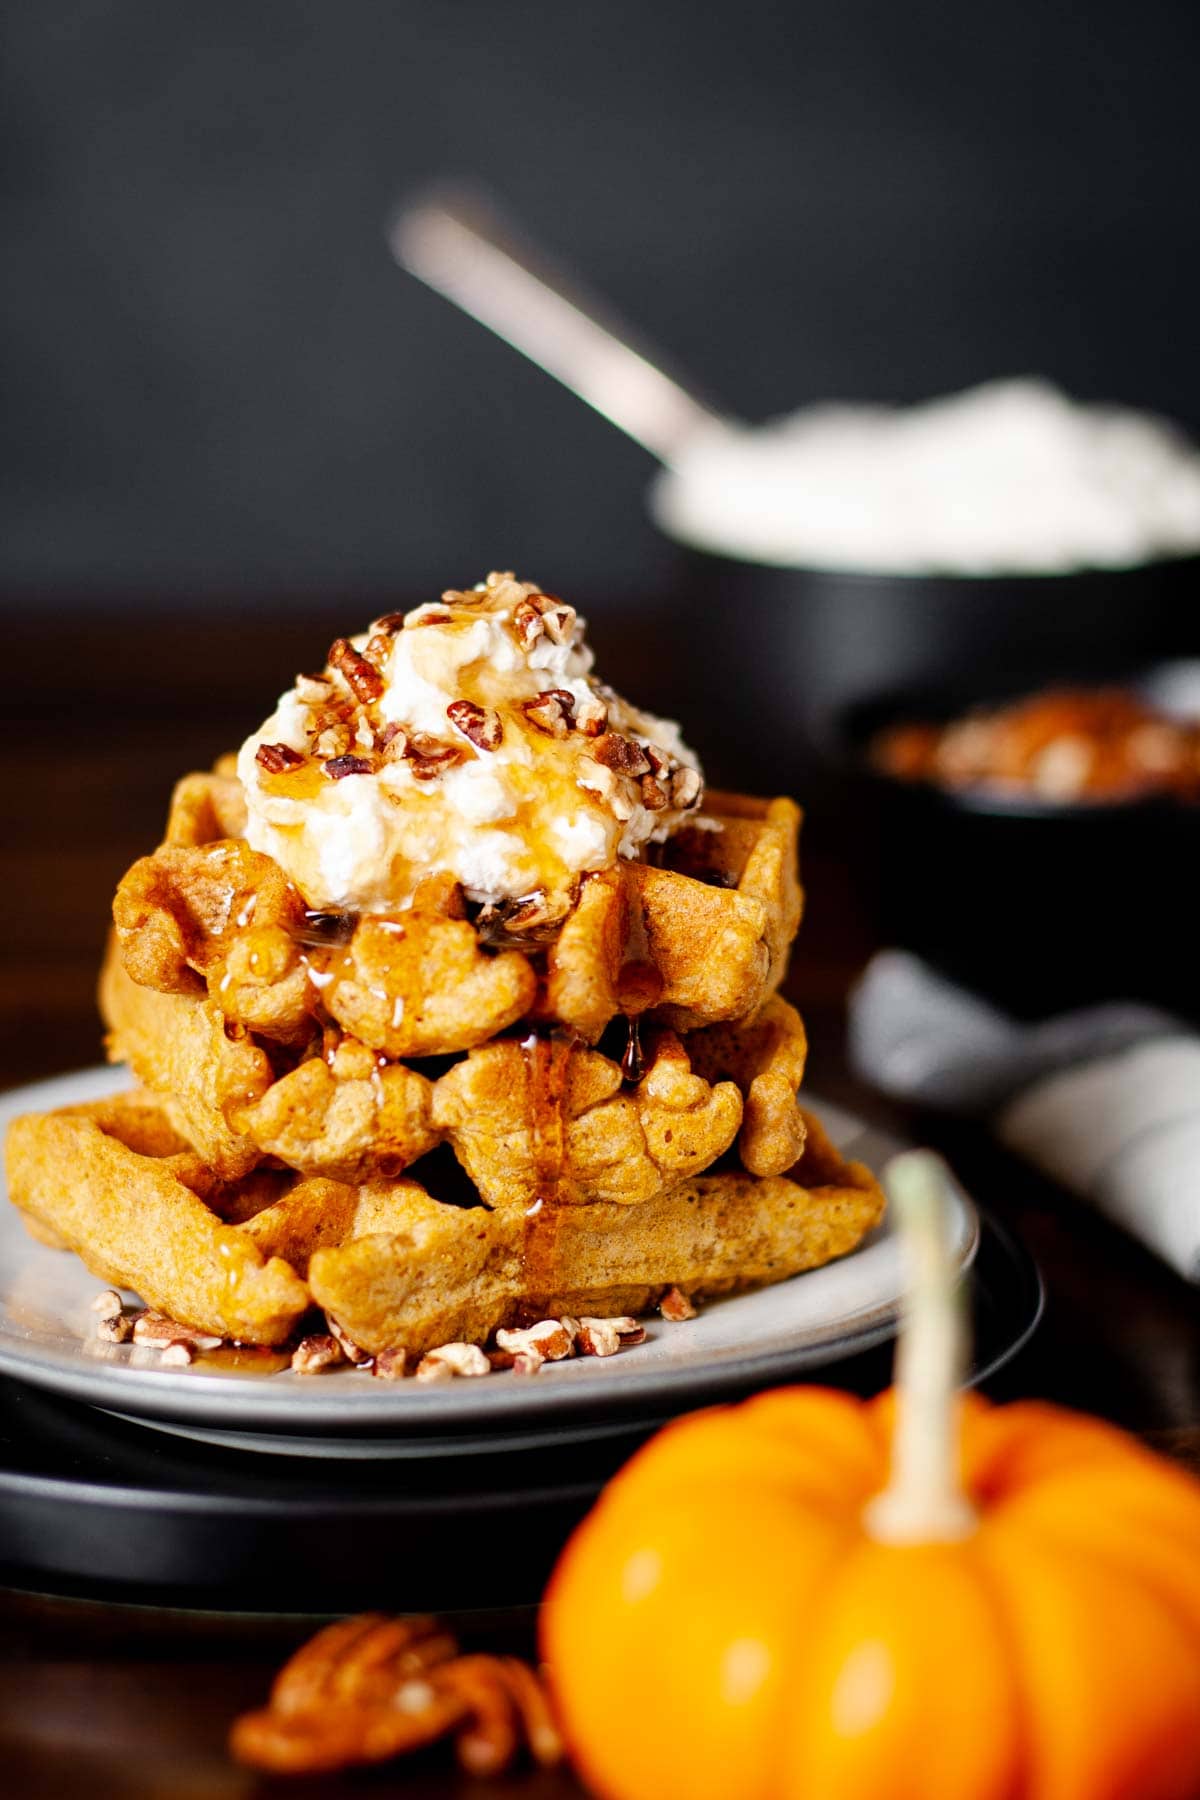 Buttermilk Pumpkin Waffles served with whipped cream and pecan pieces